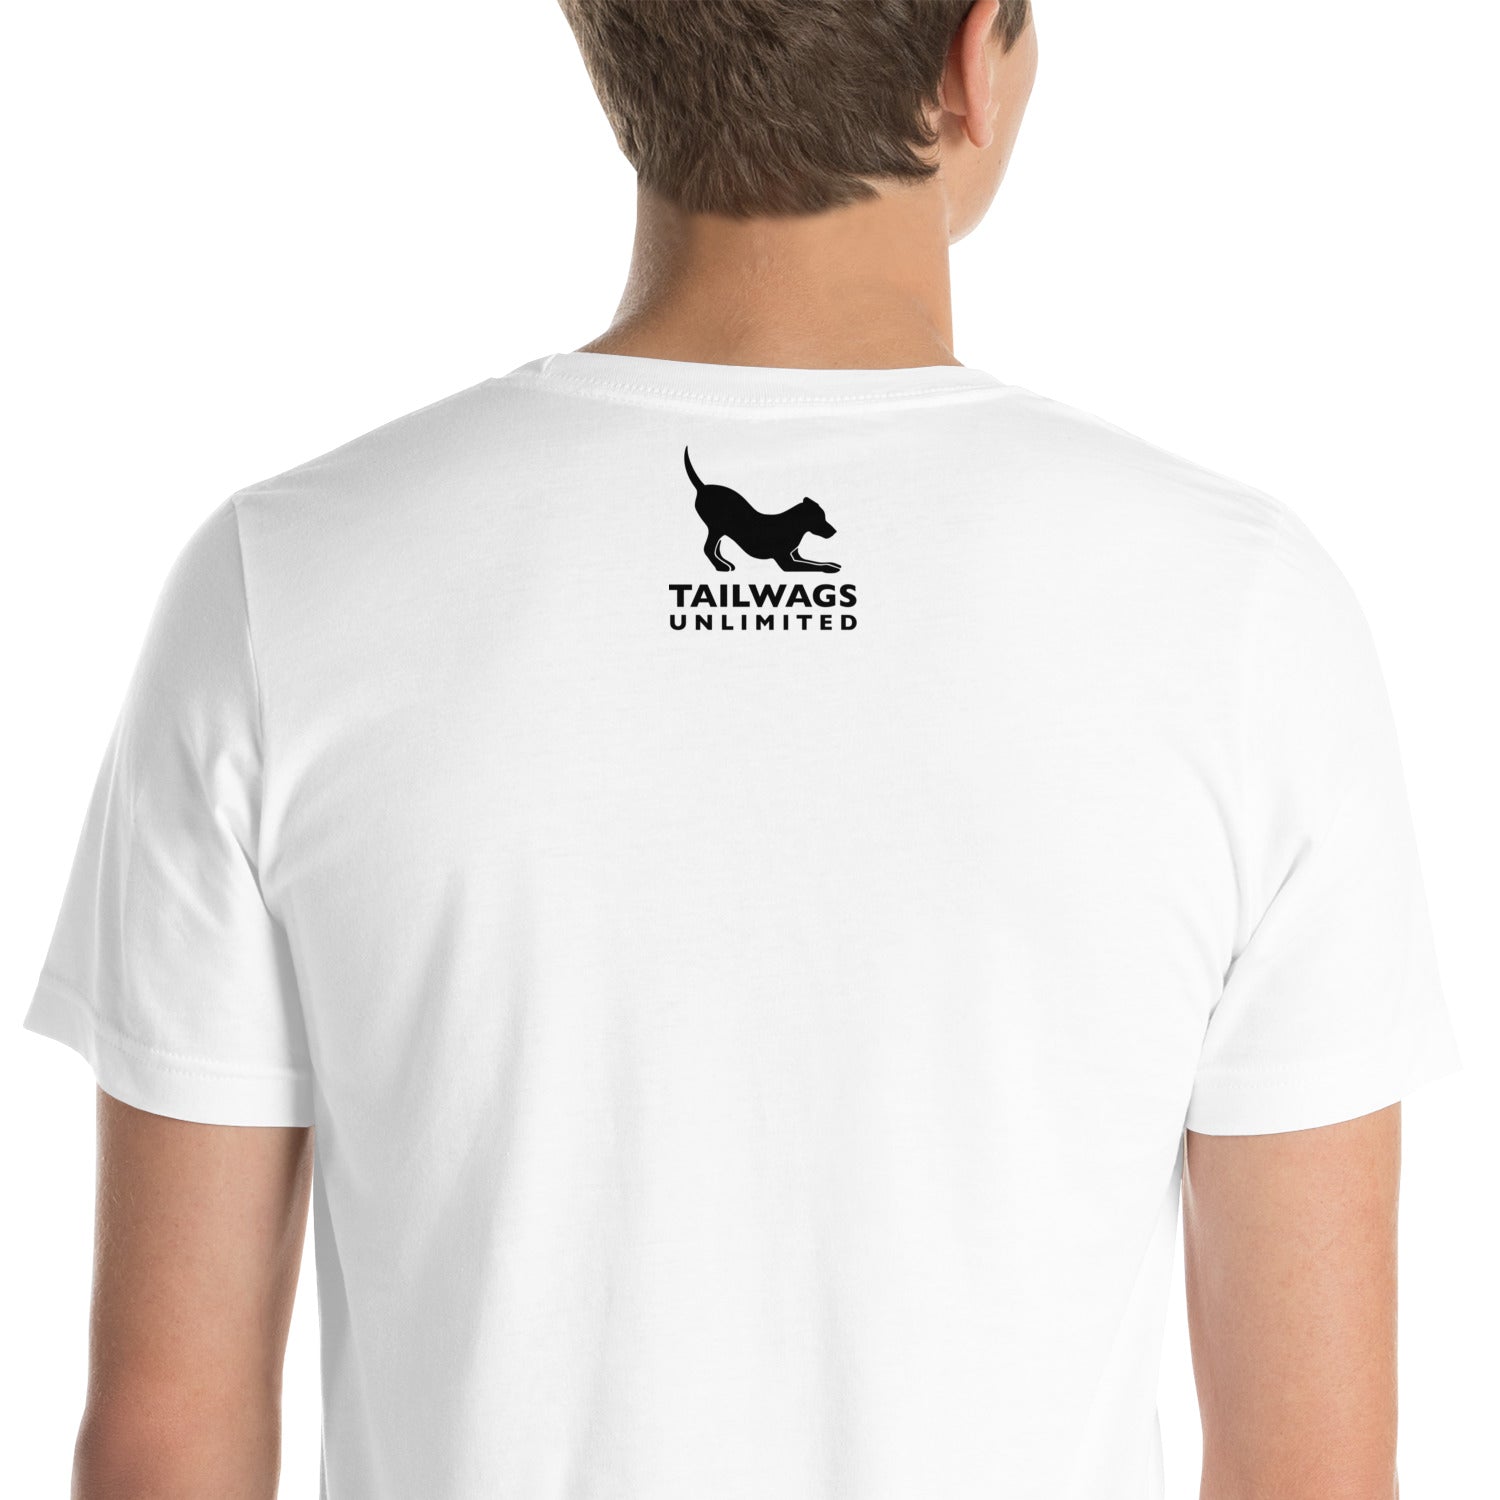 Box of Chocolates T-Shirt - TAILWAGS UNLIMITED